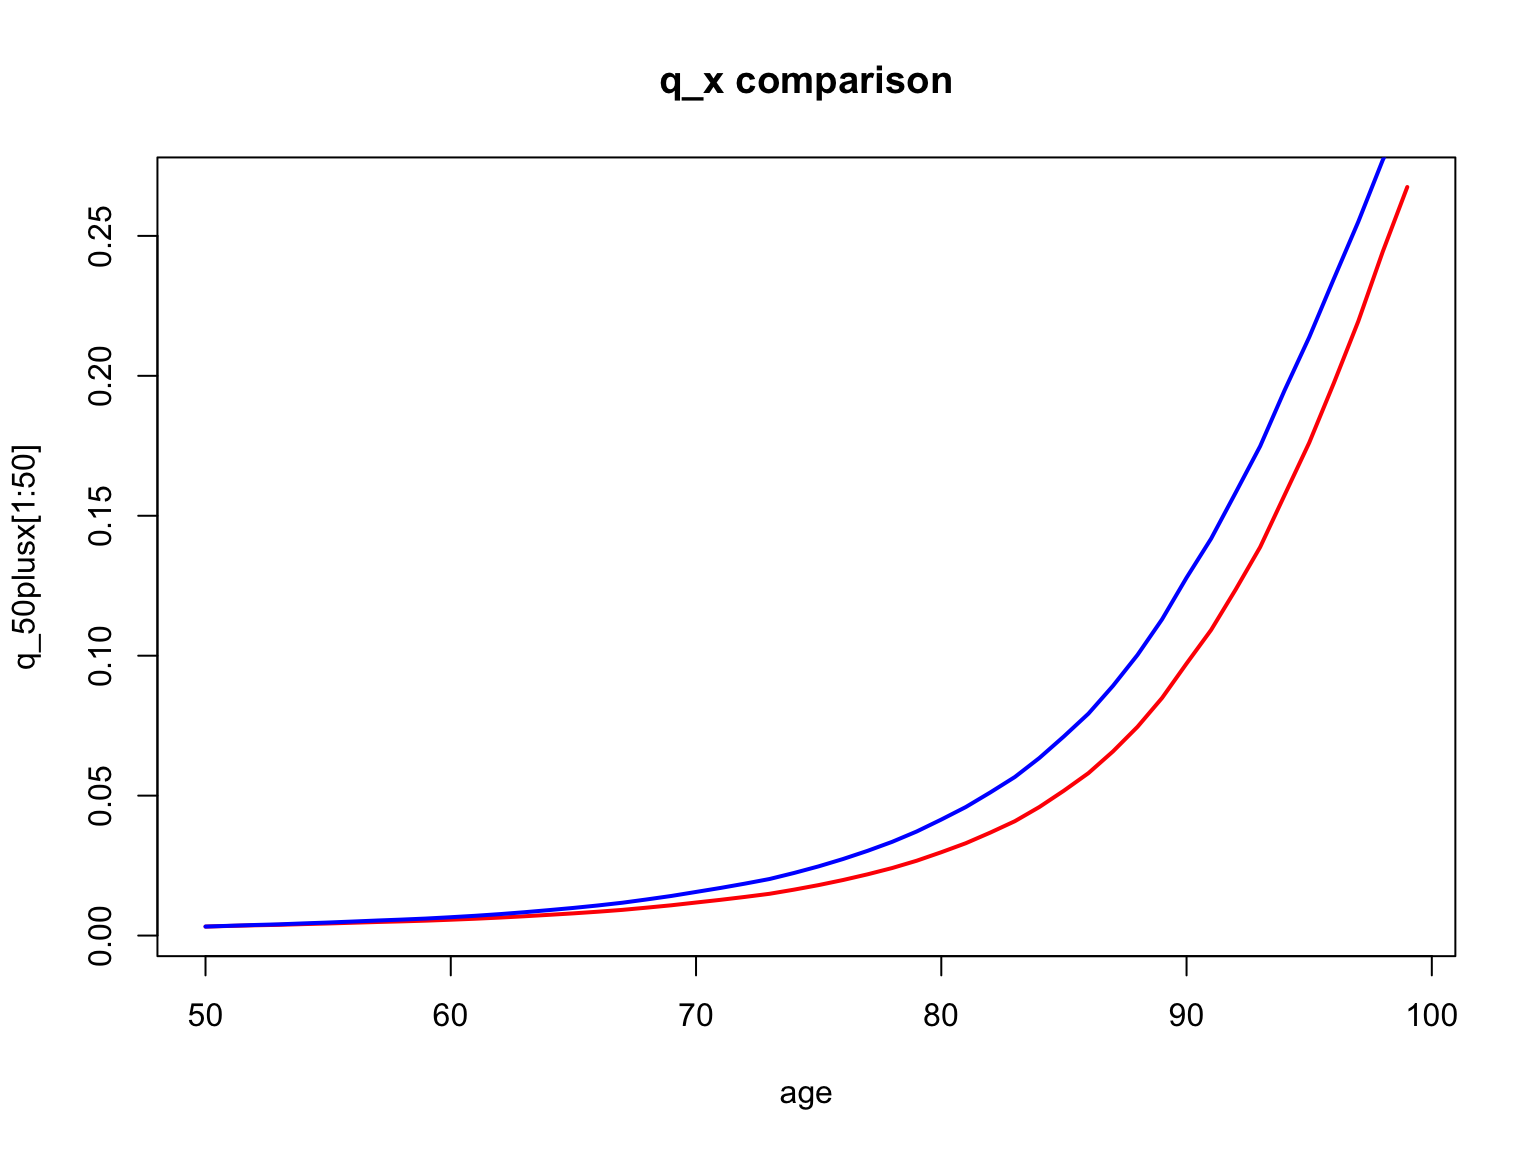 Cohort (red) vs. Period (blue) q_x for 50-year old U.S. females